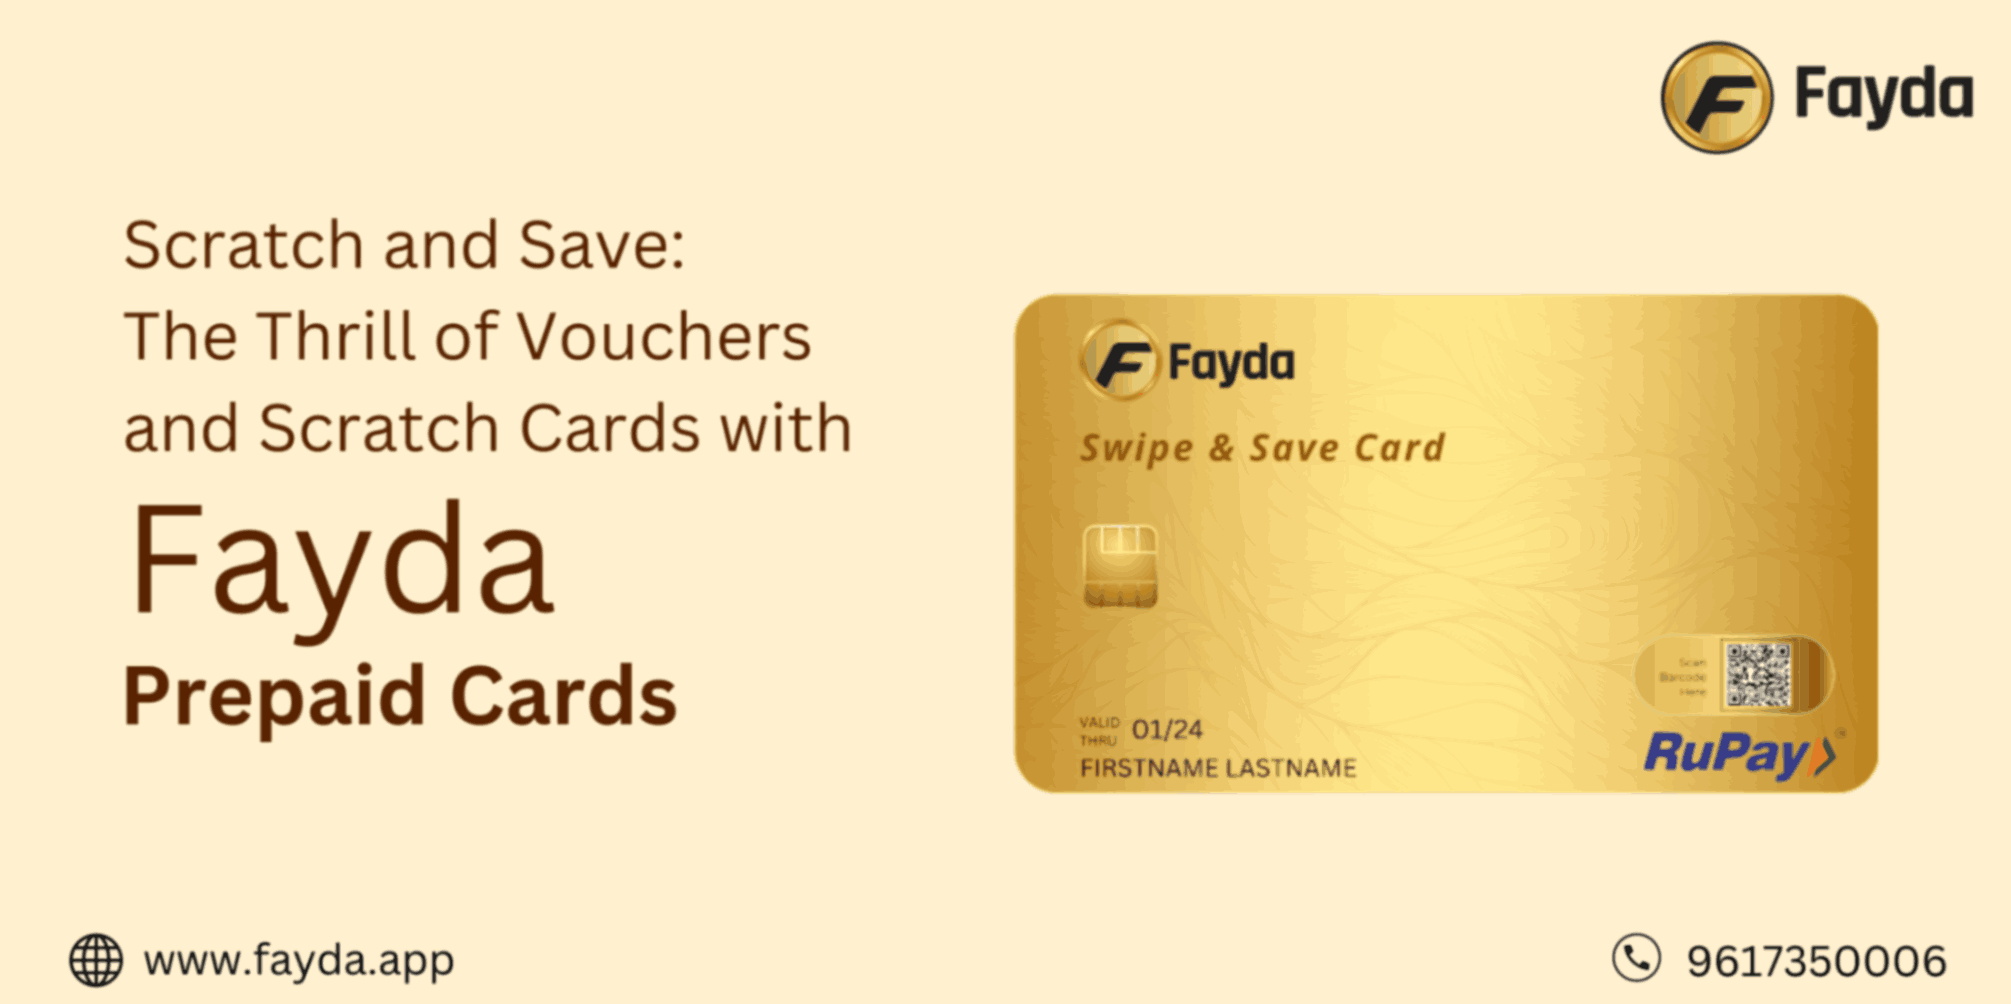 Scratch and Save: The Thrill of Vouchers and Scratch Cards with Fayda Prepaid Cards